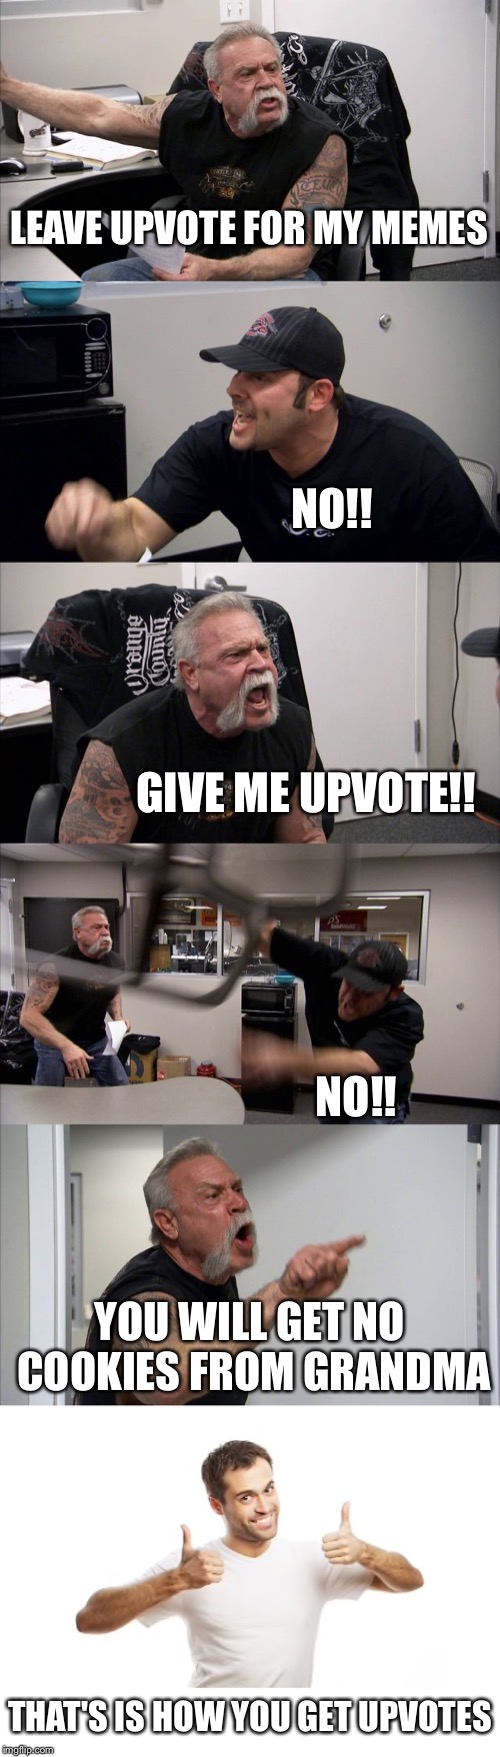 American Chopper Argument Meme | LEAVE UPVOTE FOR MY MEMES; NO!! GIVE ME UPVOTE!! NO!! YOU WILL GET NO COOKIES FROM GRANDMA; THAT'S IS HOW YOU GET UPVOTES | image tagged in memes,american chopper argument | made w/ Imgflip meme maker